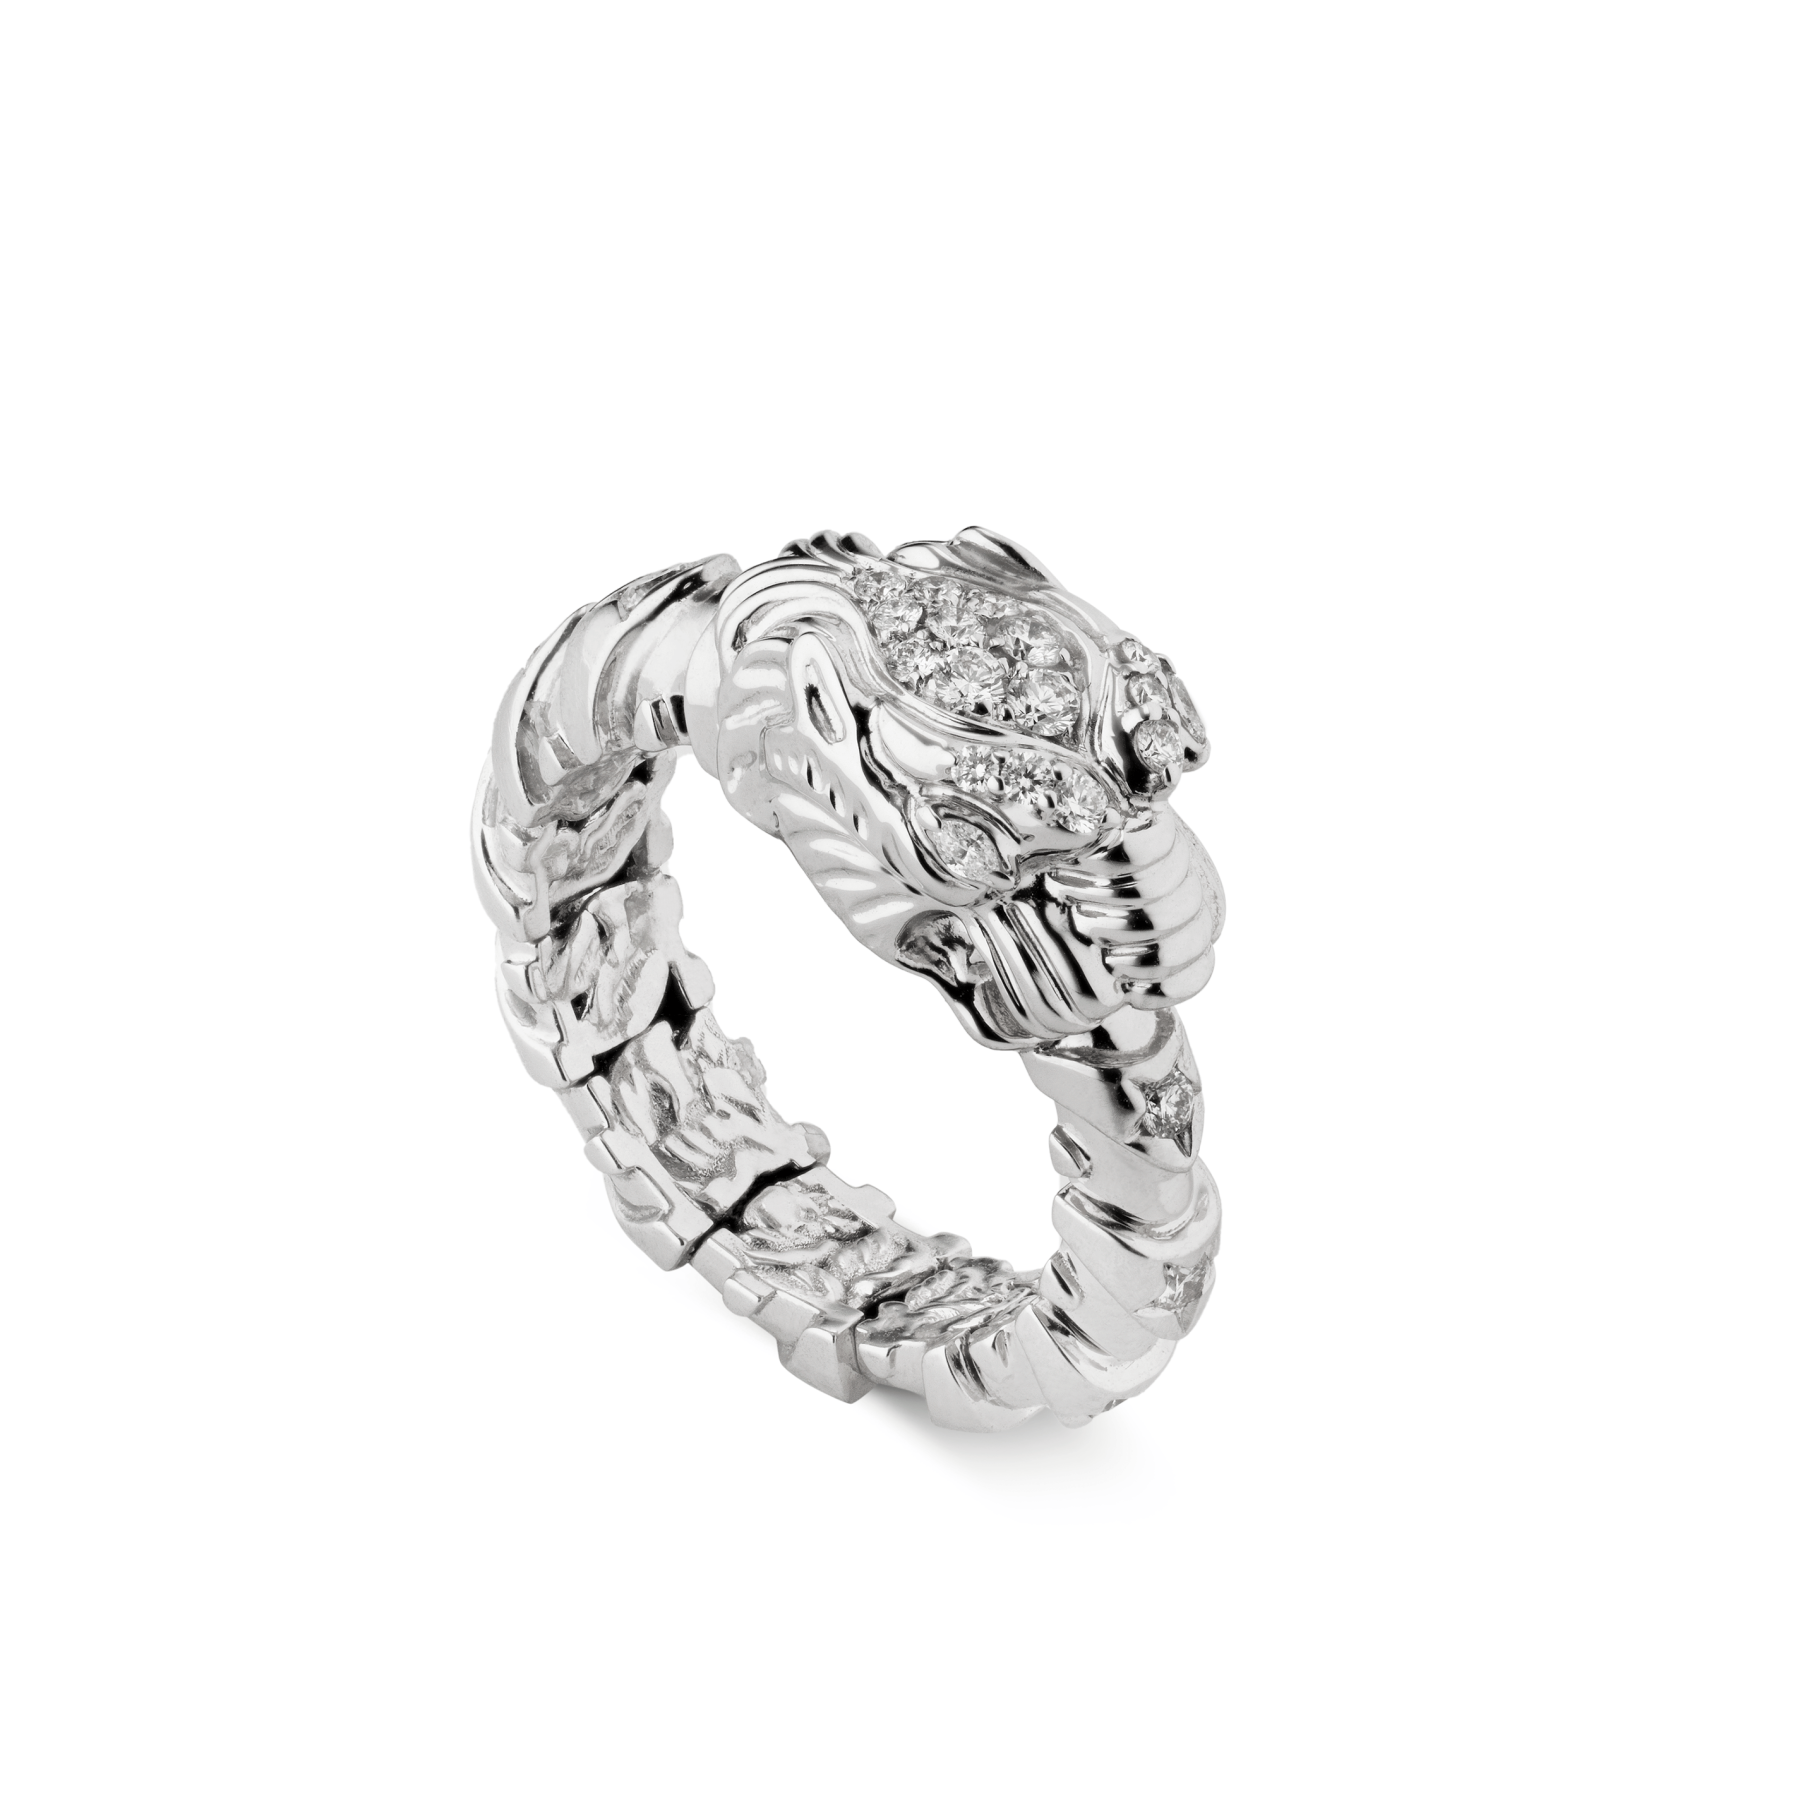 Gucci Dionysus 18K White Gold Ring with Pavé Diamonds